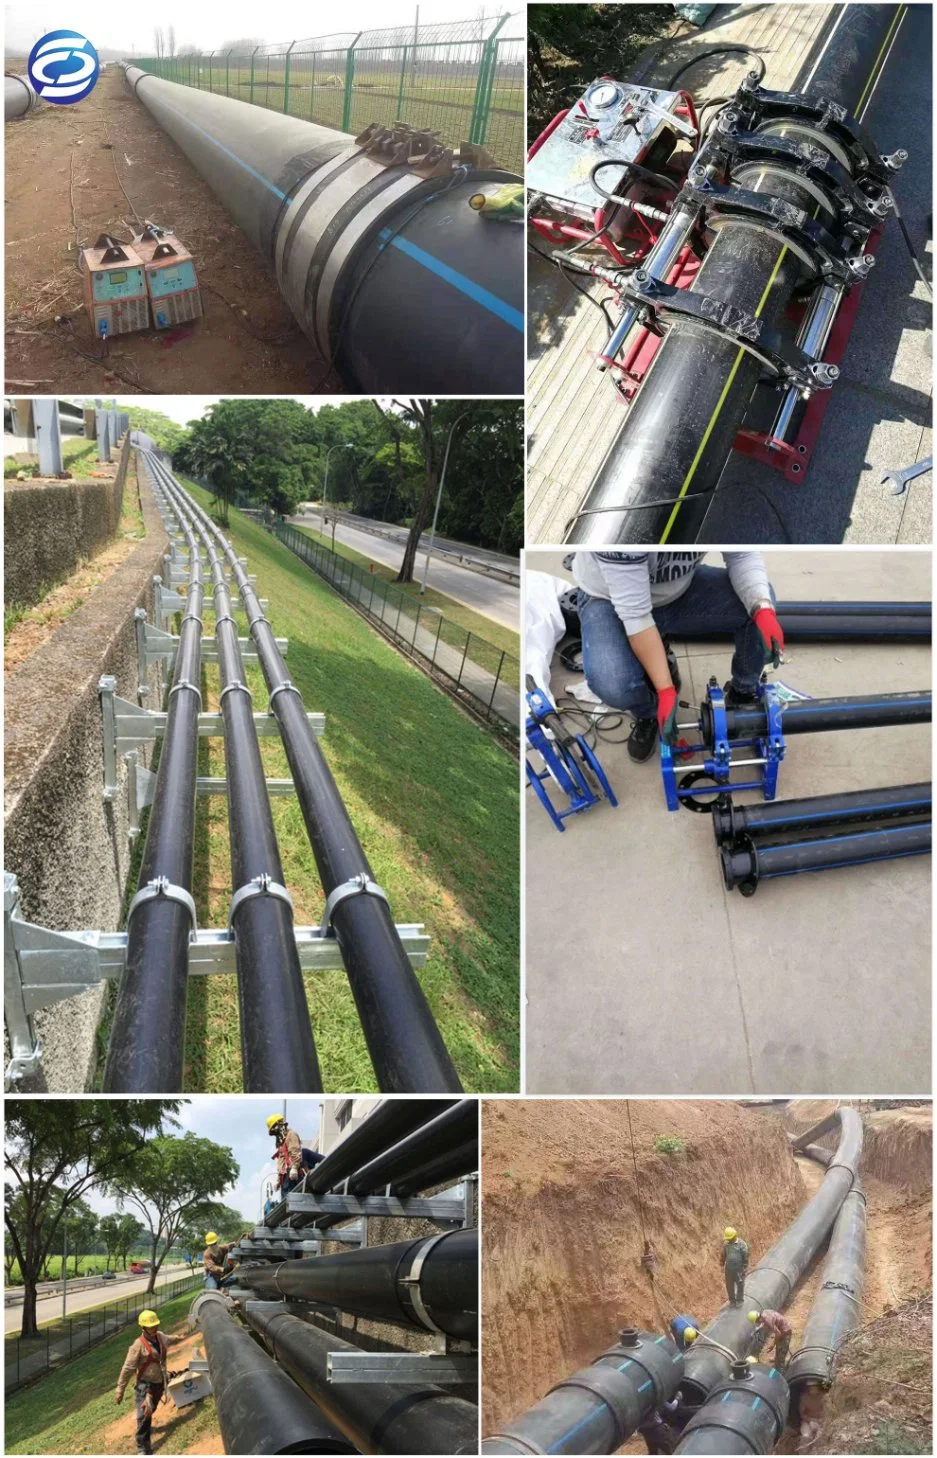 Cheap! Pressure Pipe 0.6MPa HDPE Pipe 180mm Water Pipe for Water Treatment, Industrial Pipe System